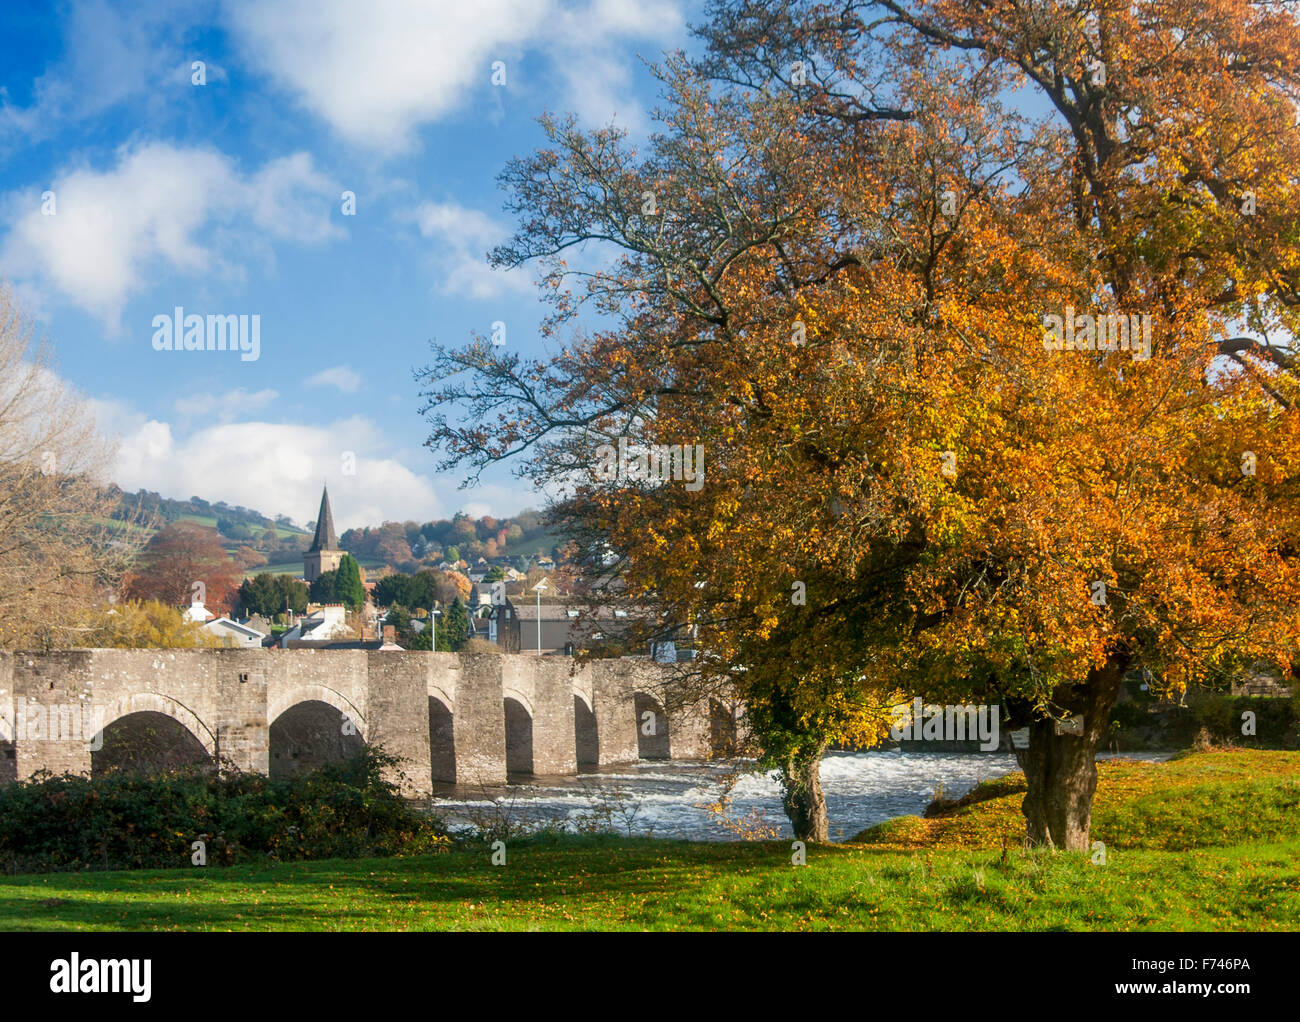 Crickhowell ponte il Fiume Usk autunno Powys Wales UK Foto Stock